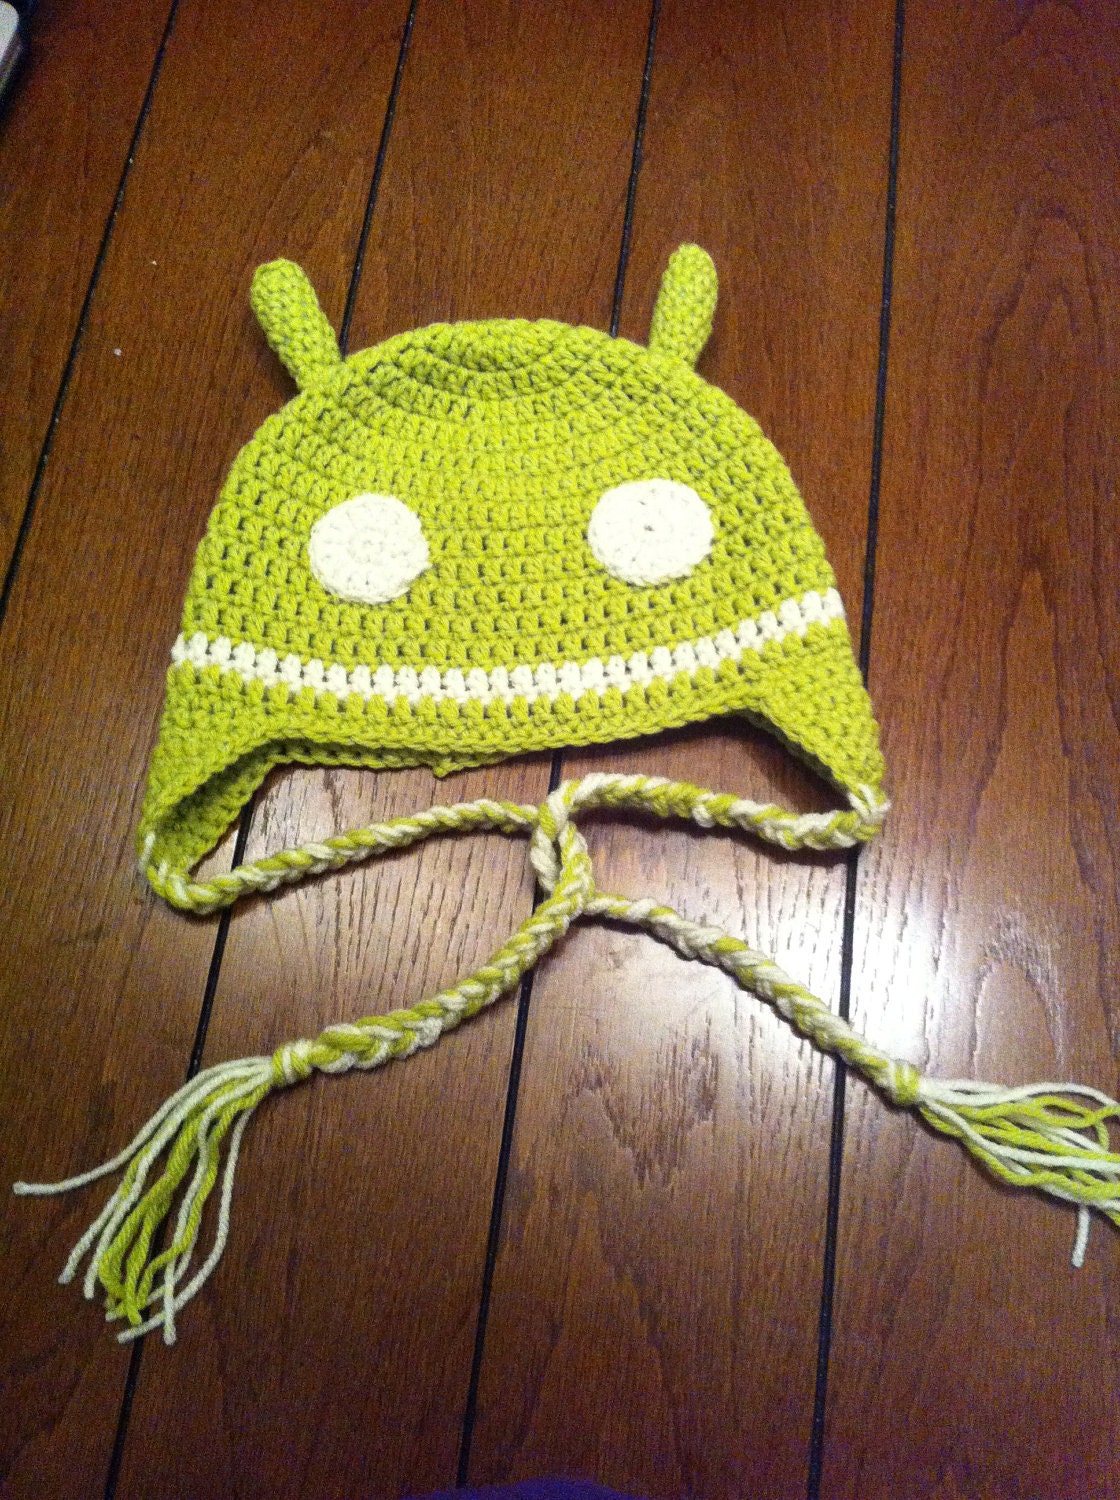 Android Hat